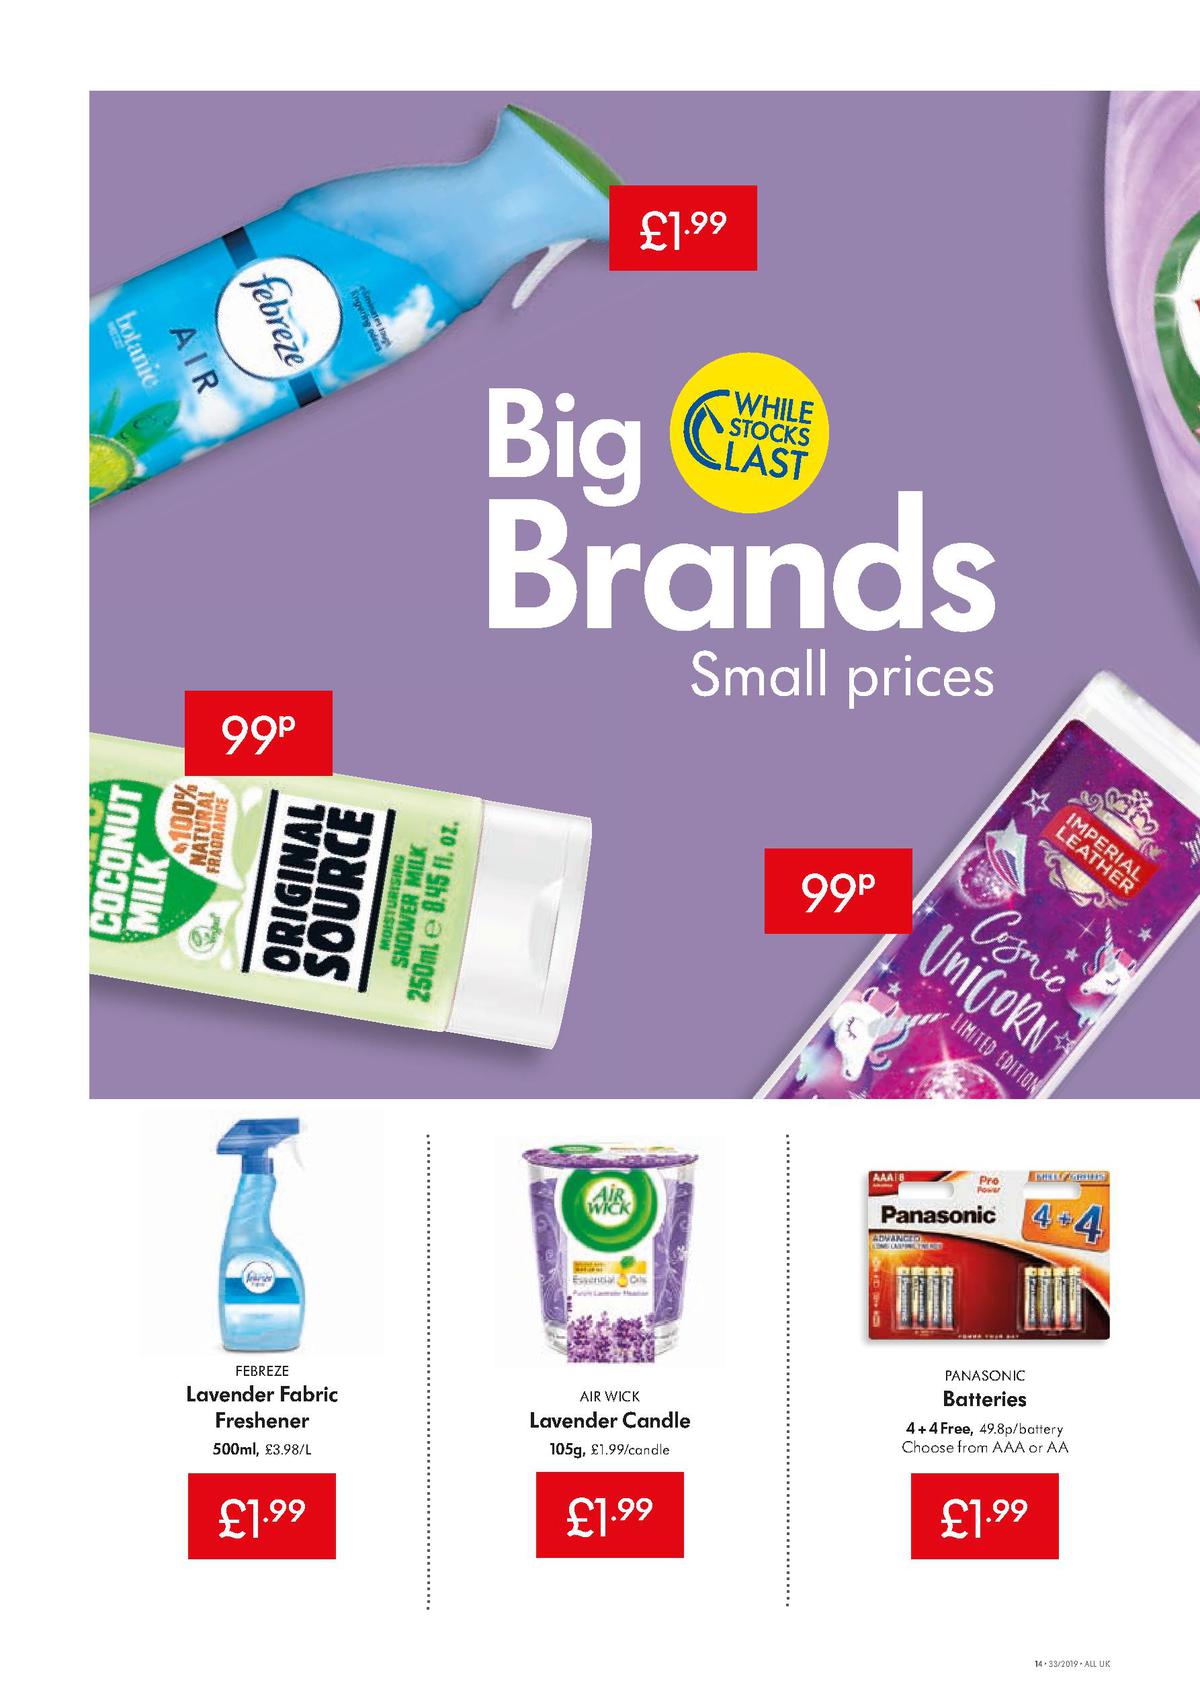 LIDL Offers from 15 August